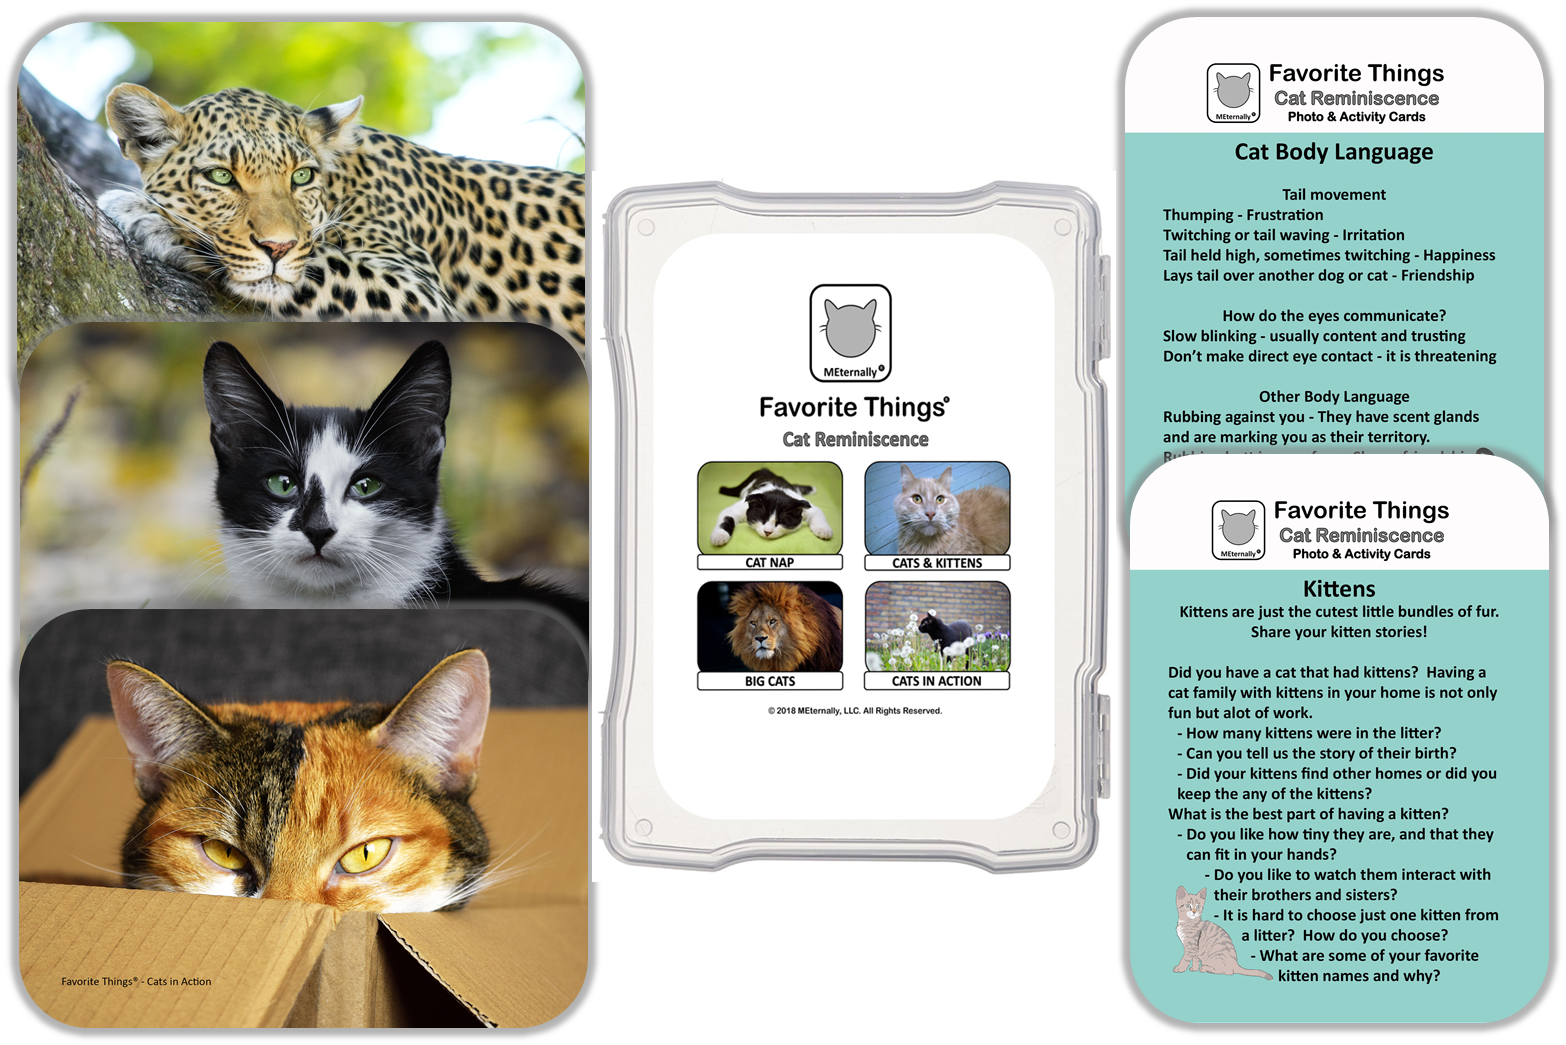 Reminiscence Therapy - Cat Collection Photo and Activity Cards